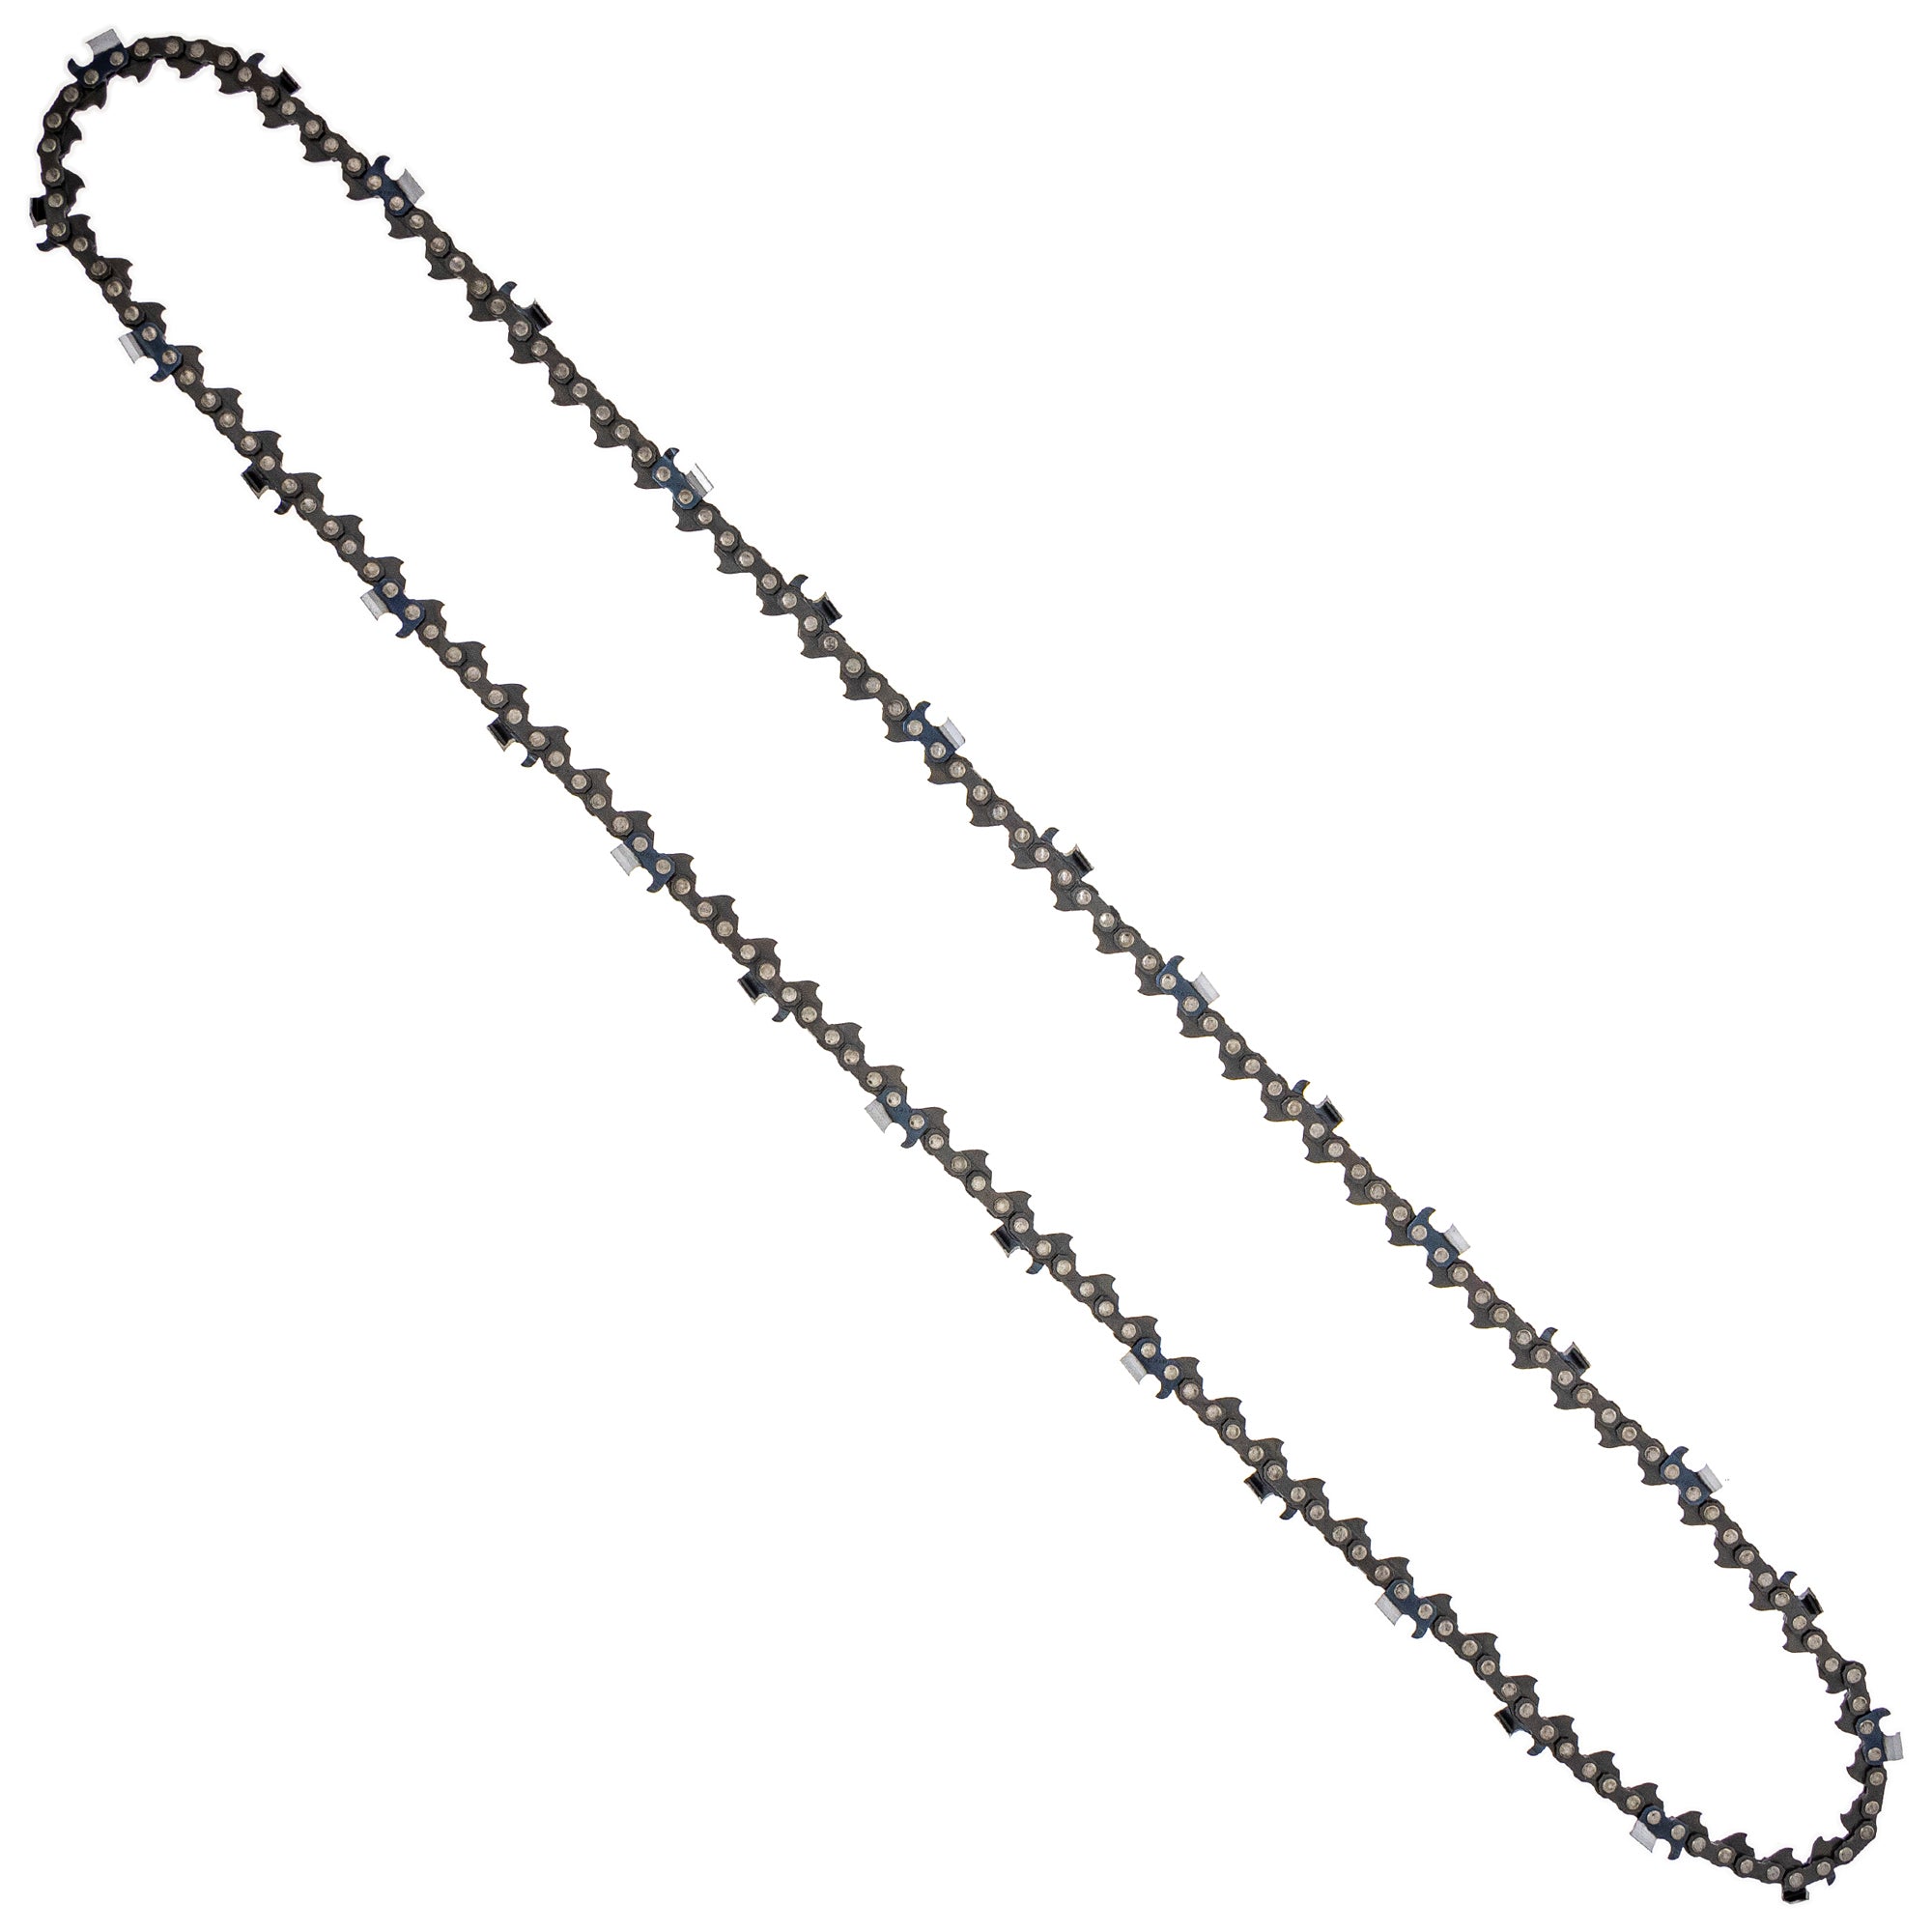 8TEN 810-CCC2207H Chain 3-Pack for zOTHER Oregon MS 066 064 056